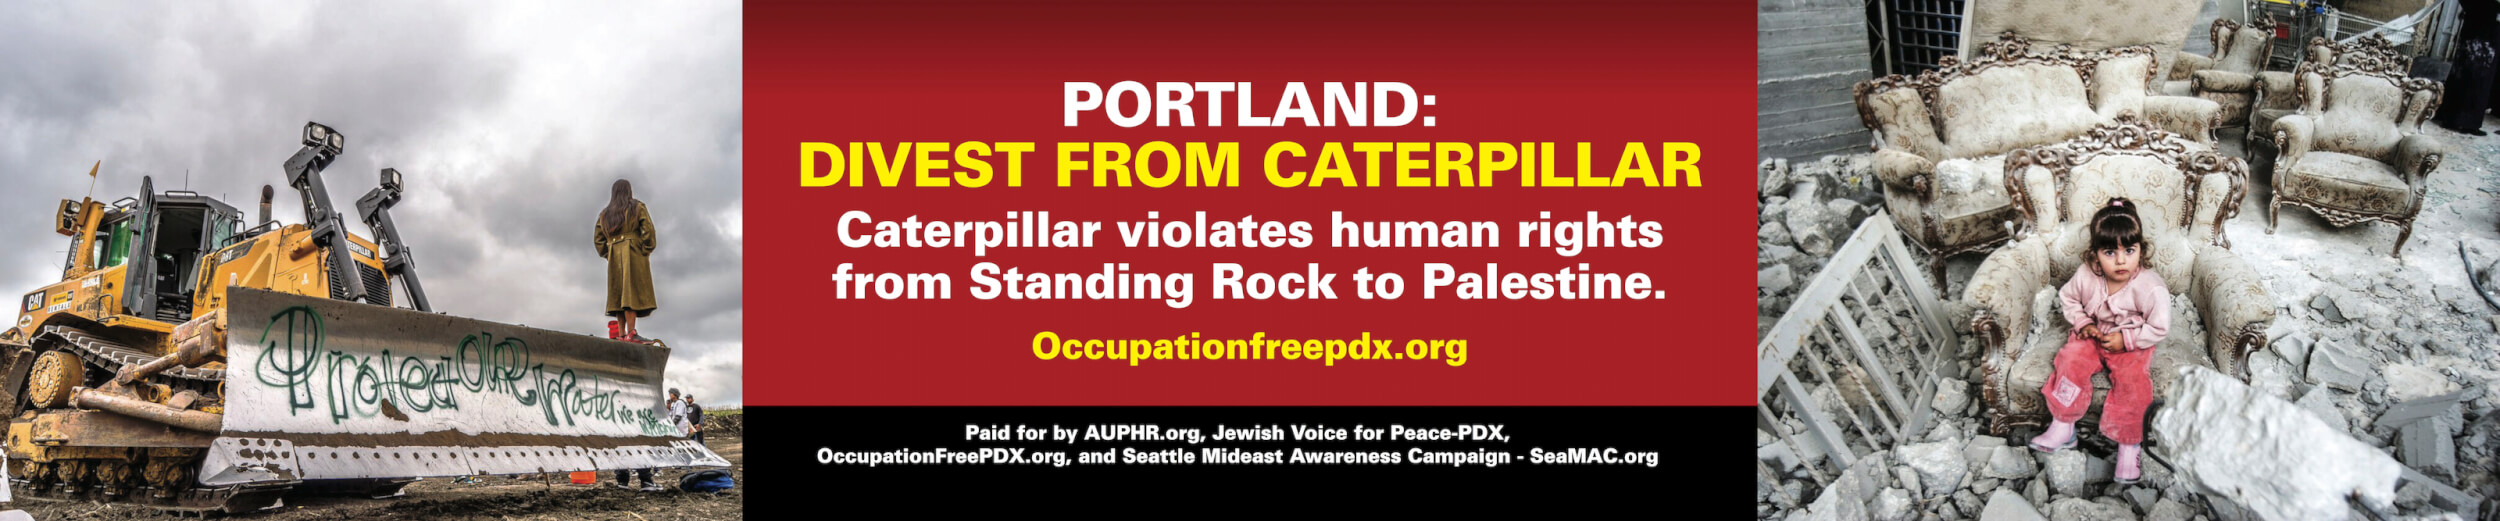 Portland: Divest from Caterpillar - Caterpillar Violates Human Rights from Standing Rock to Palestine (Bus Ad by Occupation-Free Portland and SeaMac) 